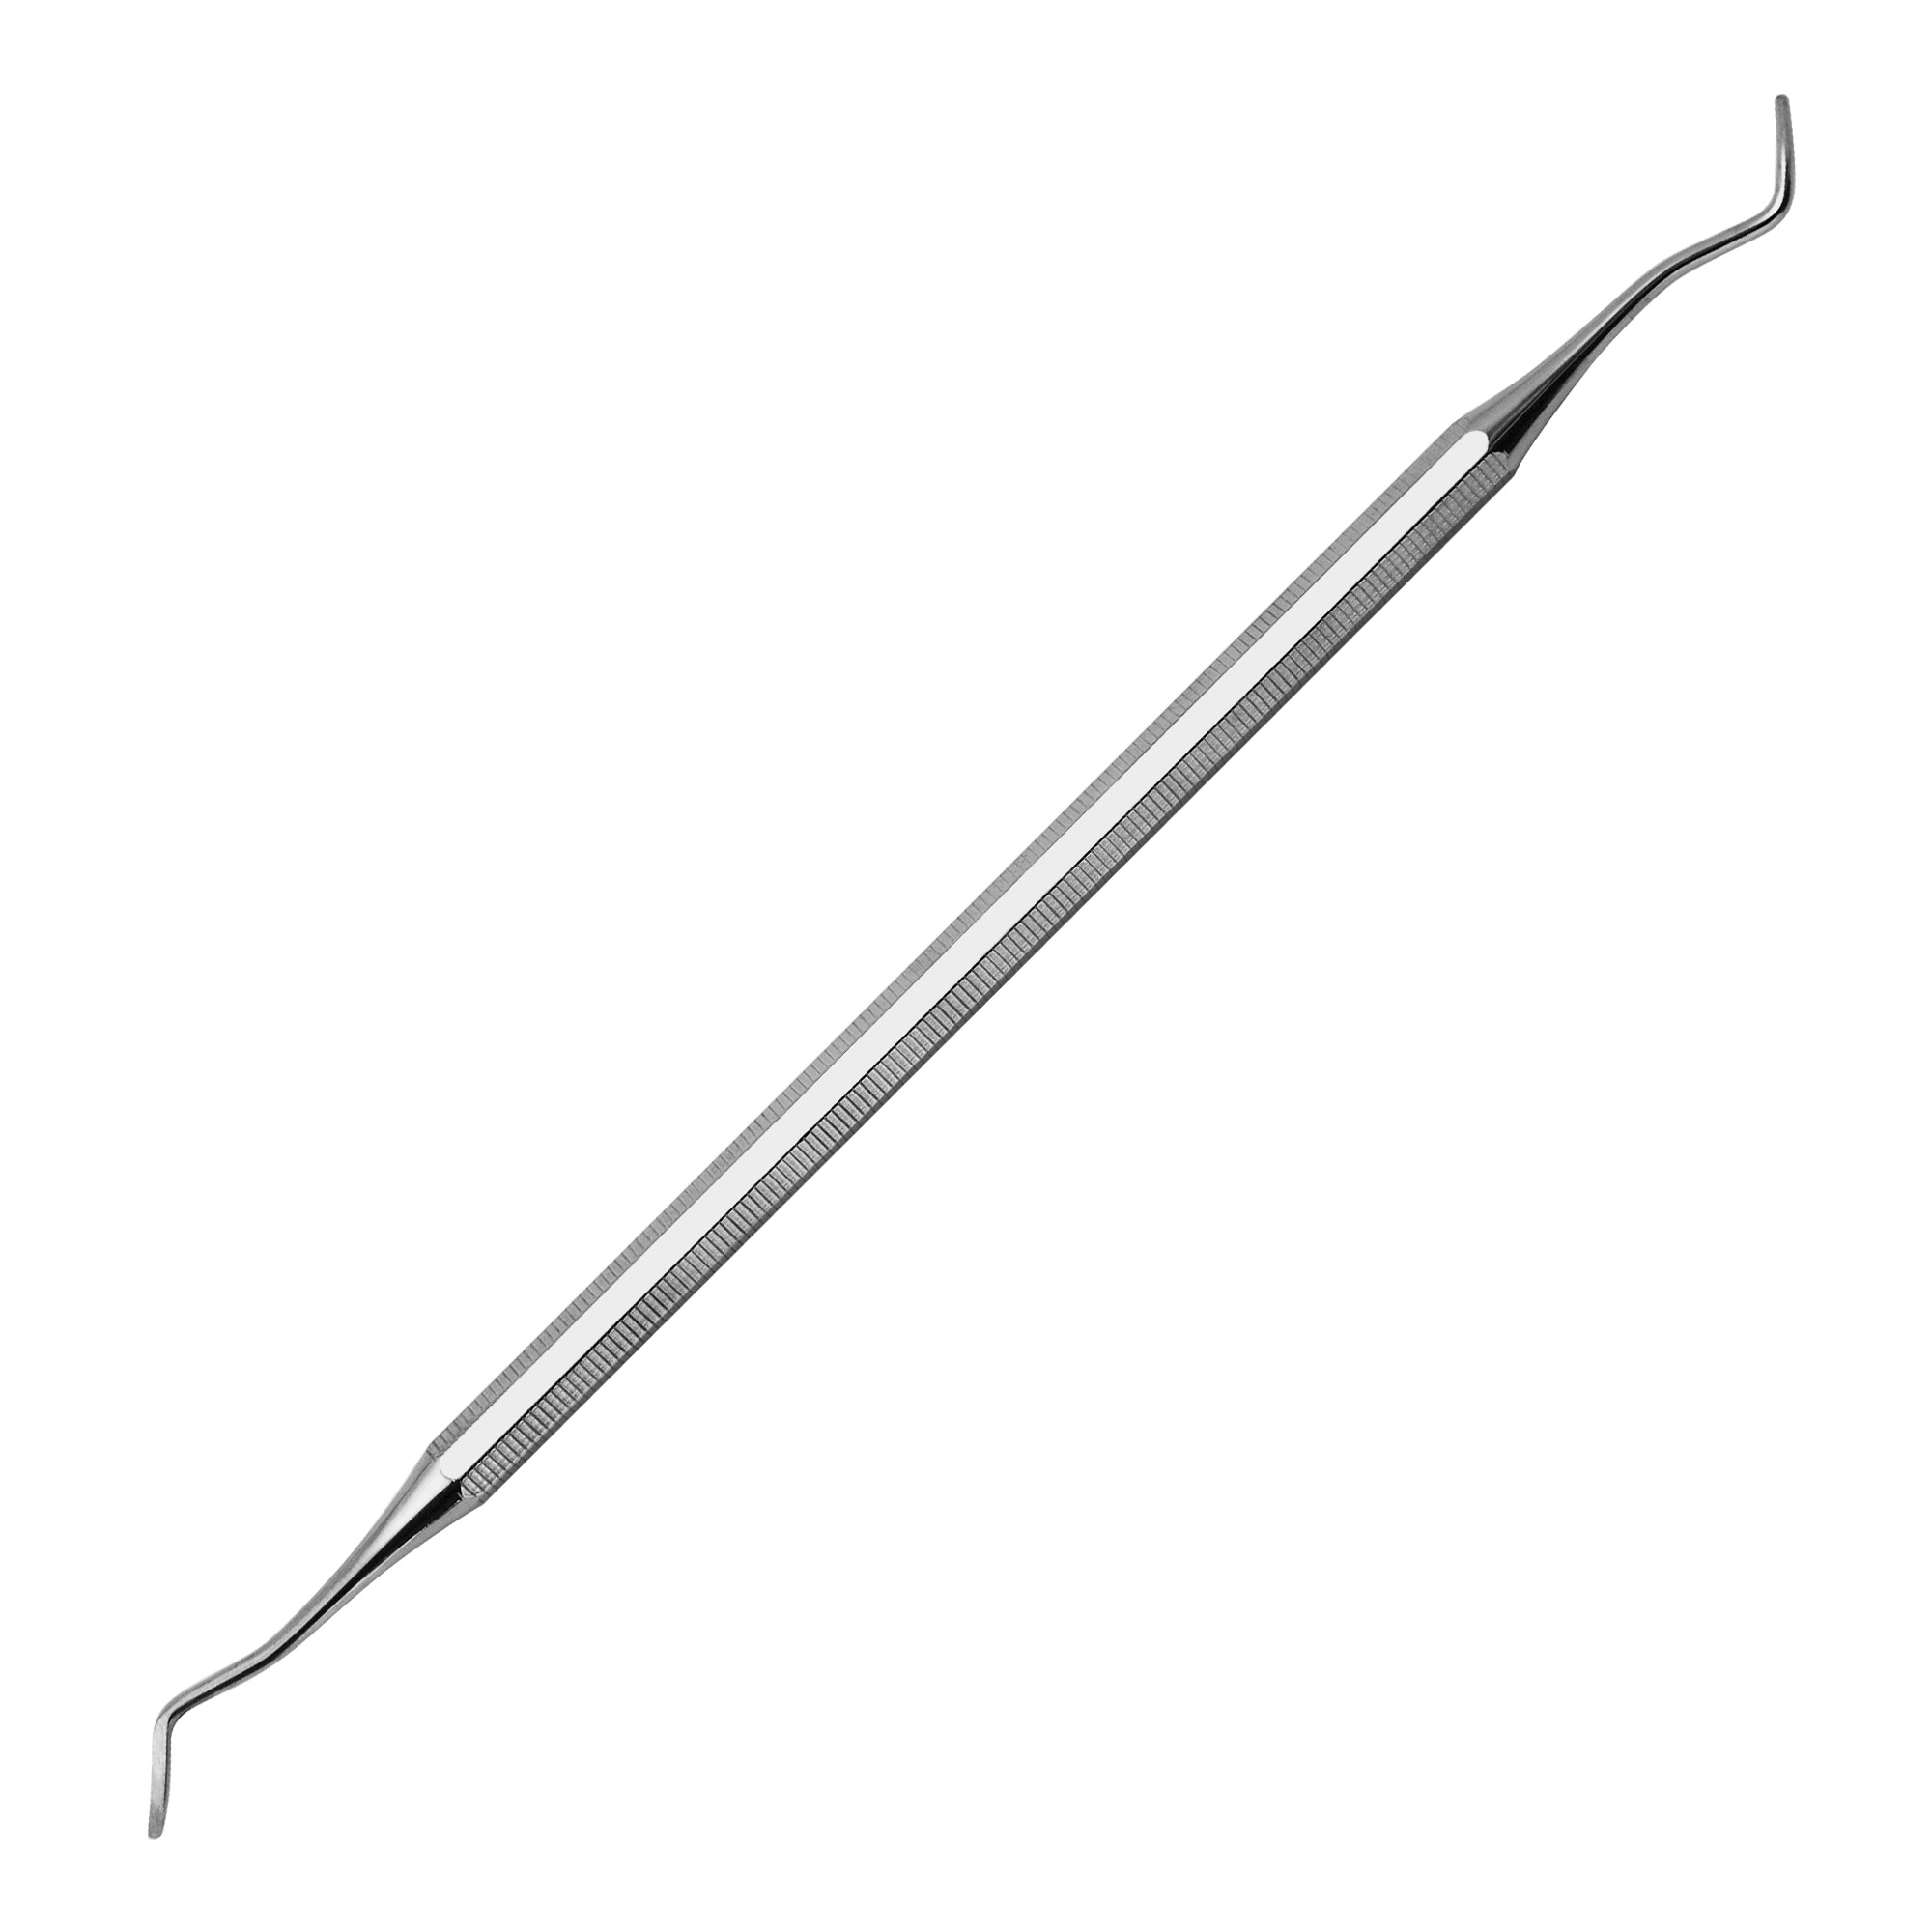 Professional stainless steel double-end curette with double angled tip